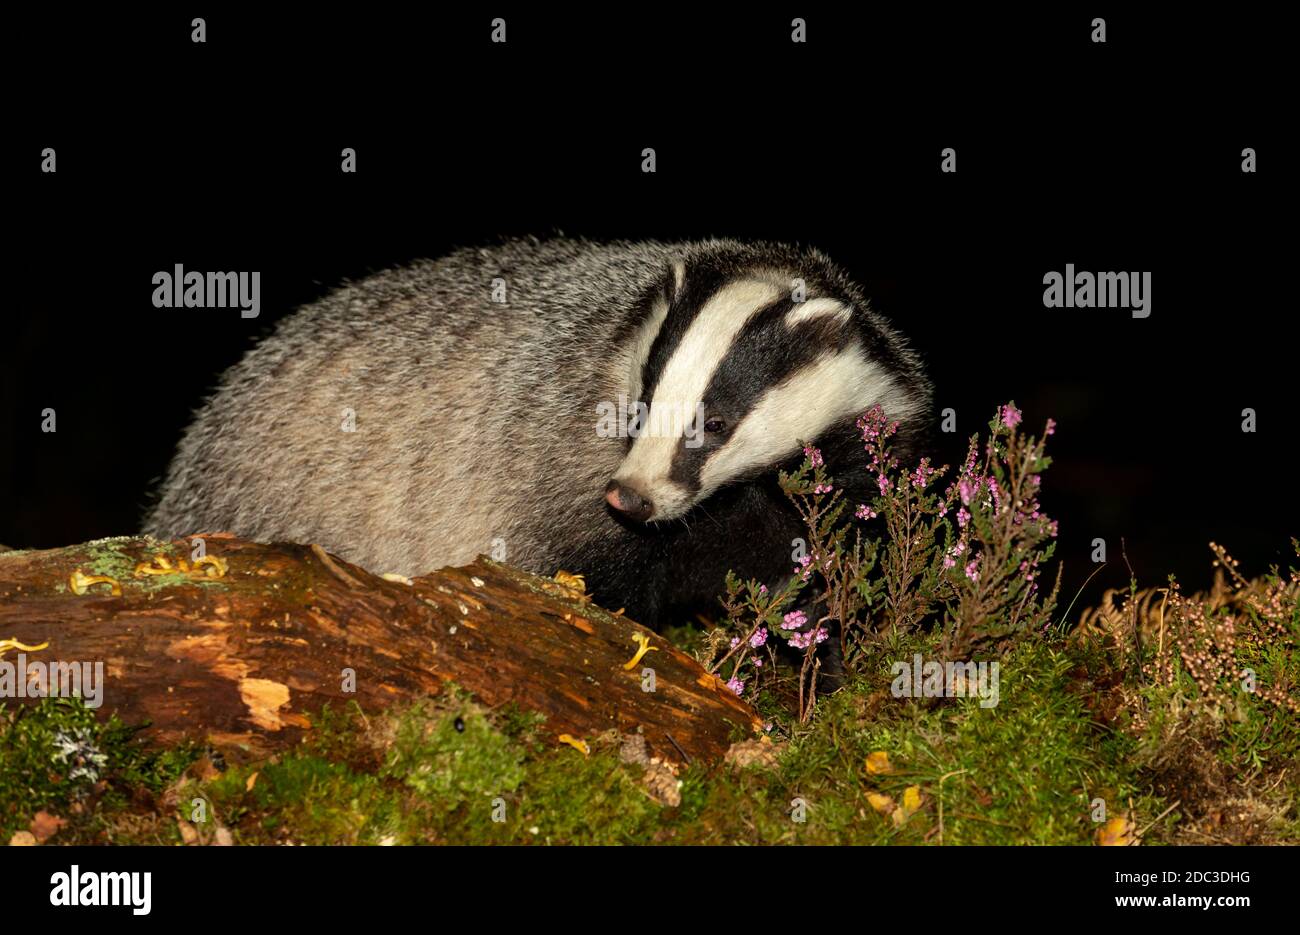 Badger, Scientific name: Meles Meles. Wild, native, Eurasian badger foraging at night with purple heather and a fallen log.  Facing left.  Night-time Stock Photo